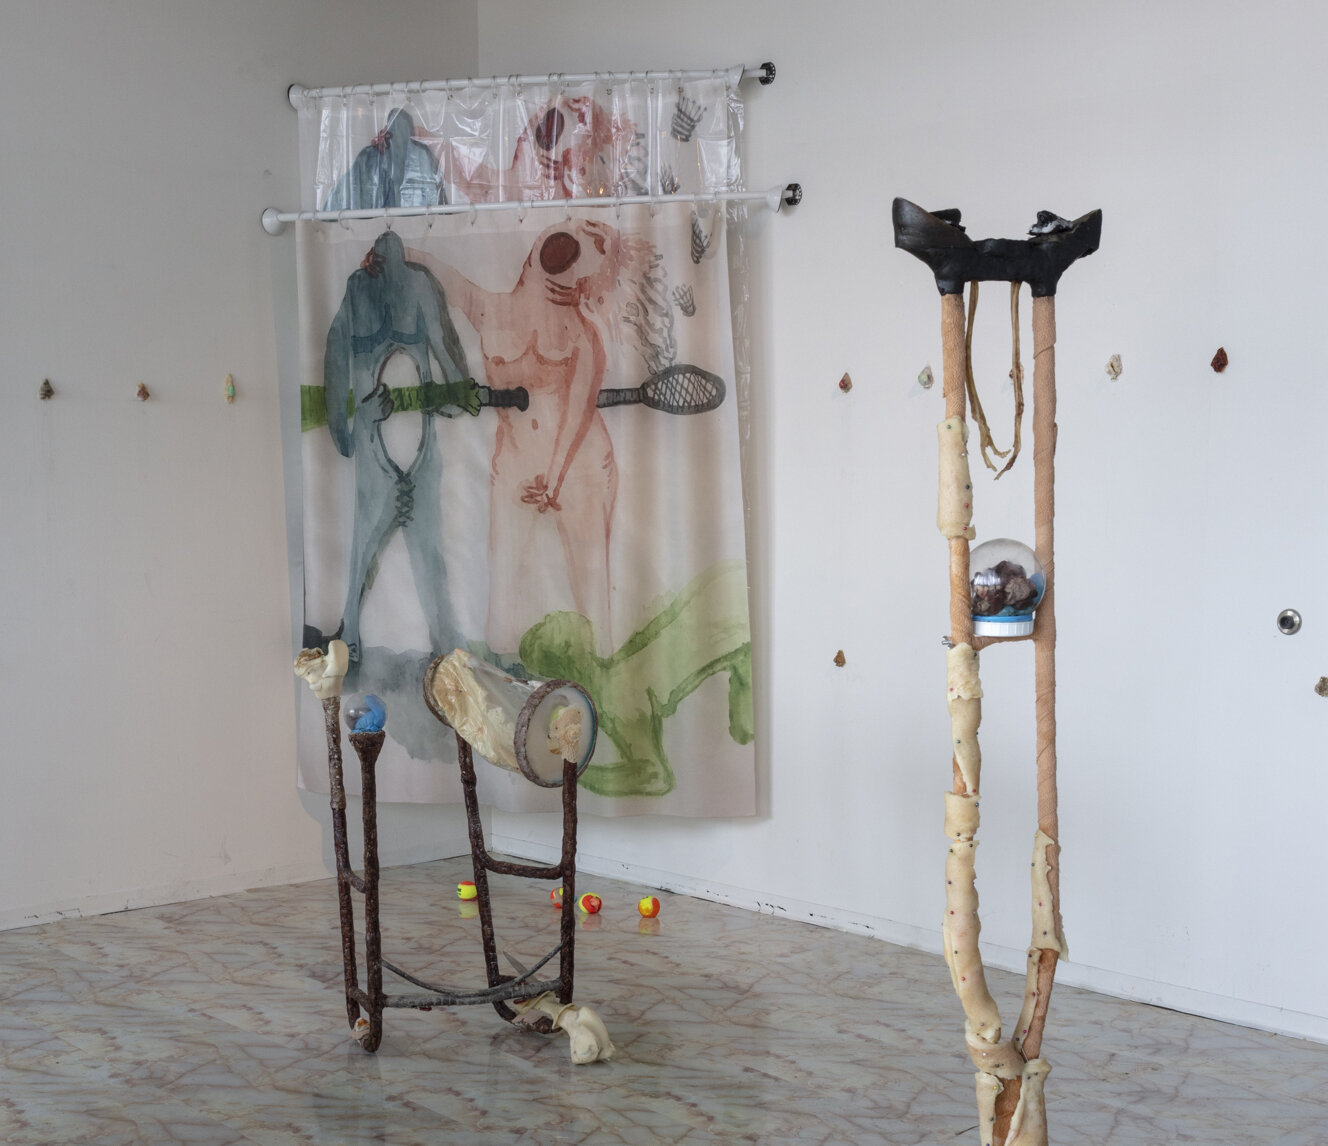  Lauren Lee  (pit-a-pat) stabbing myself thru and through with a well-bruised banana , 2019 (installation view) Water color drawings, shower curtains, shower curtain rods, paraffin wax, doe urine, sheep's placenta, used walker, used crutch, epoxy cla